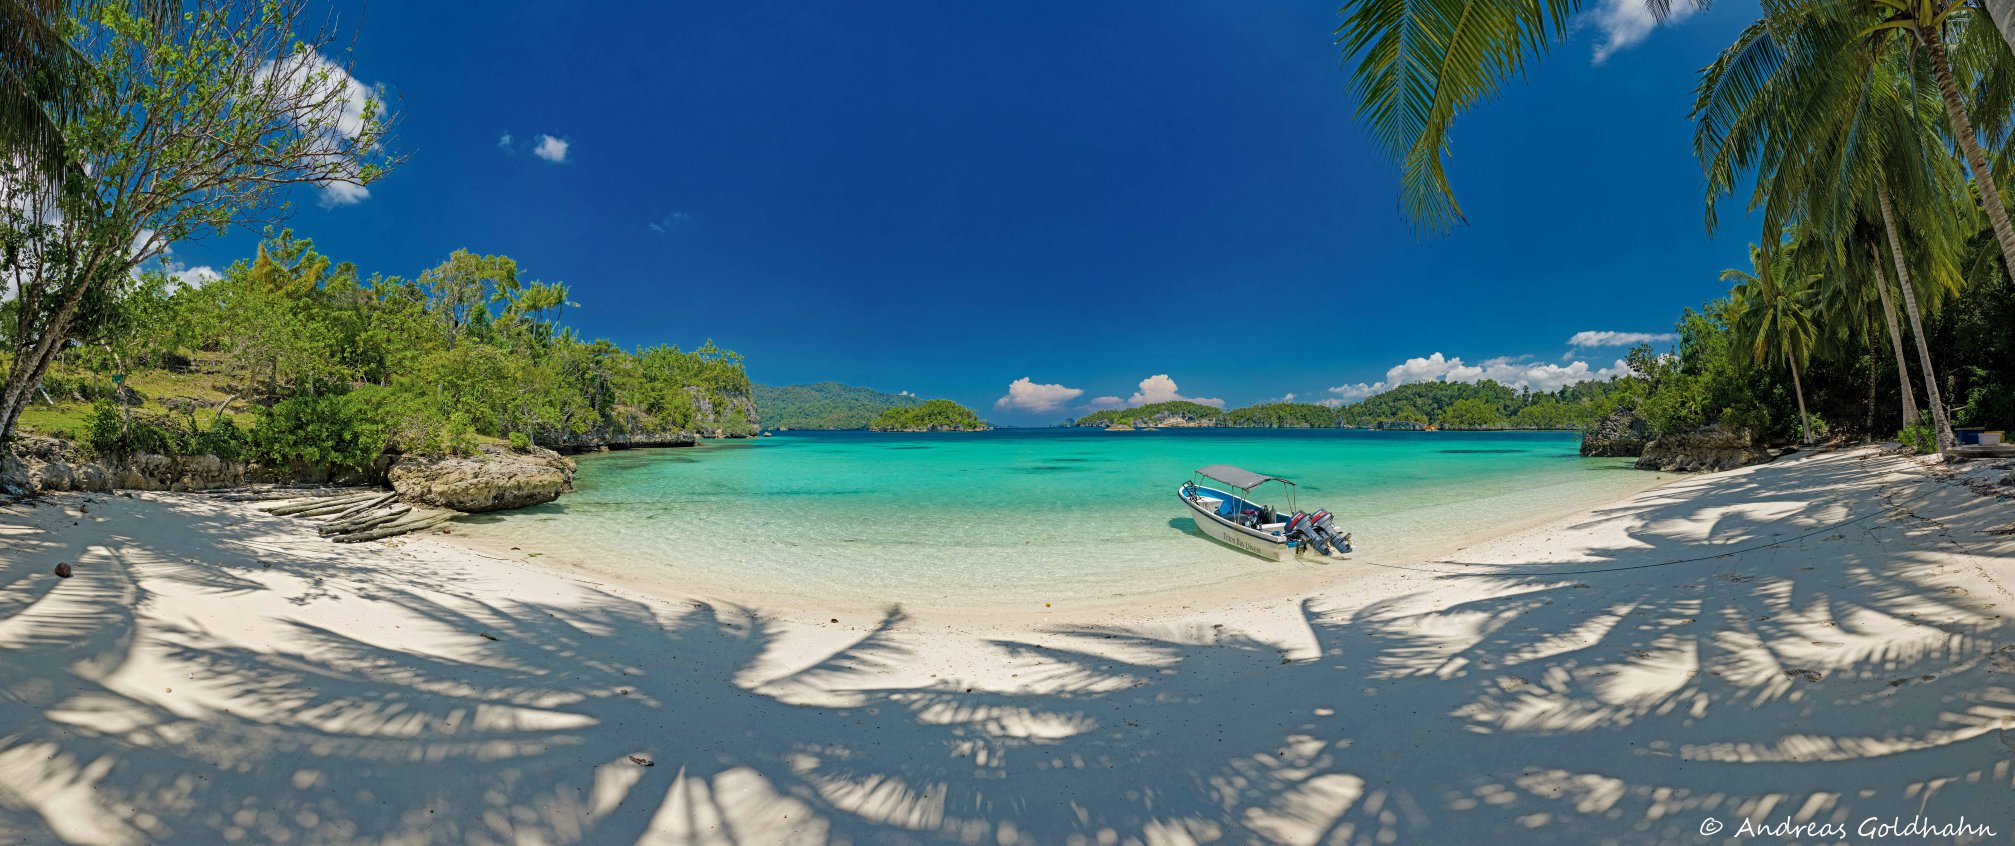 Location of Triton Bay Divers Resort in Indonesia